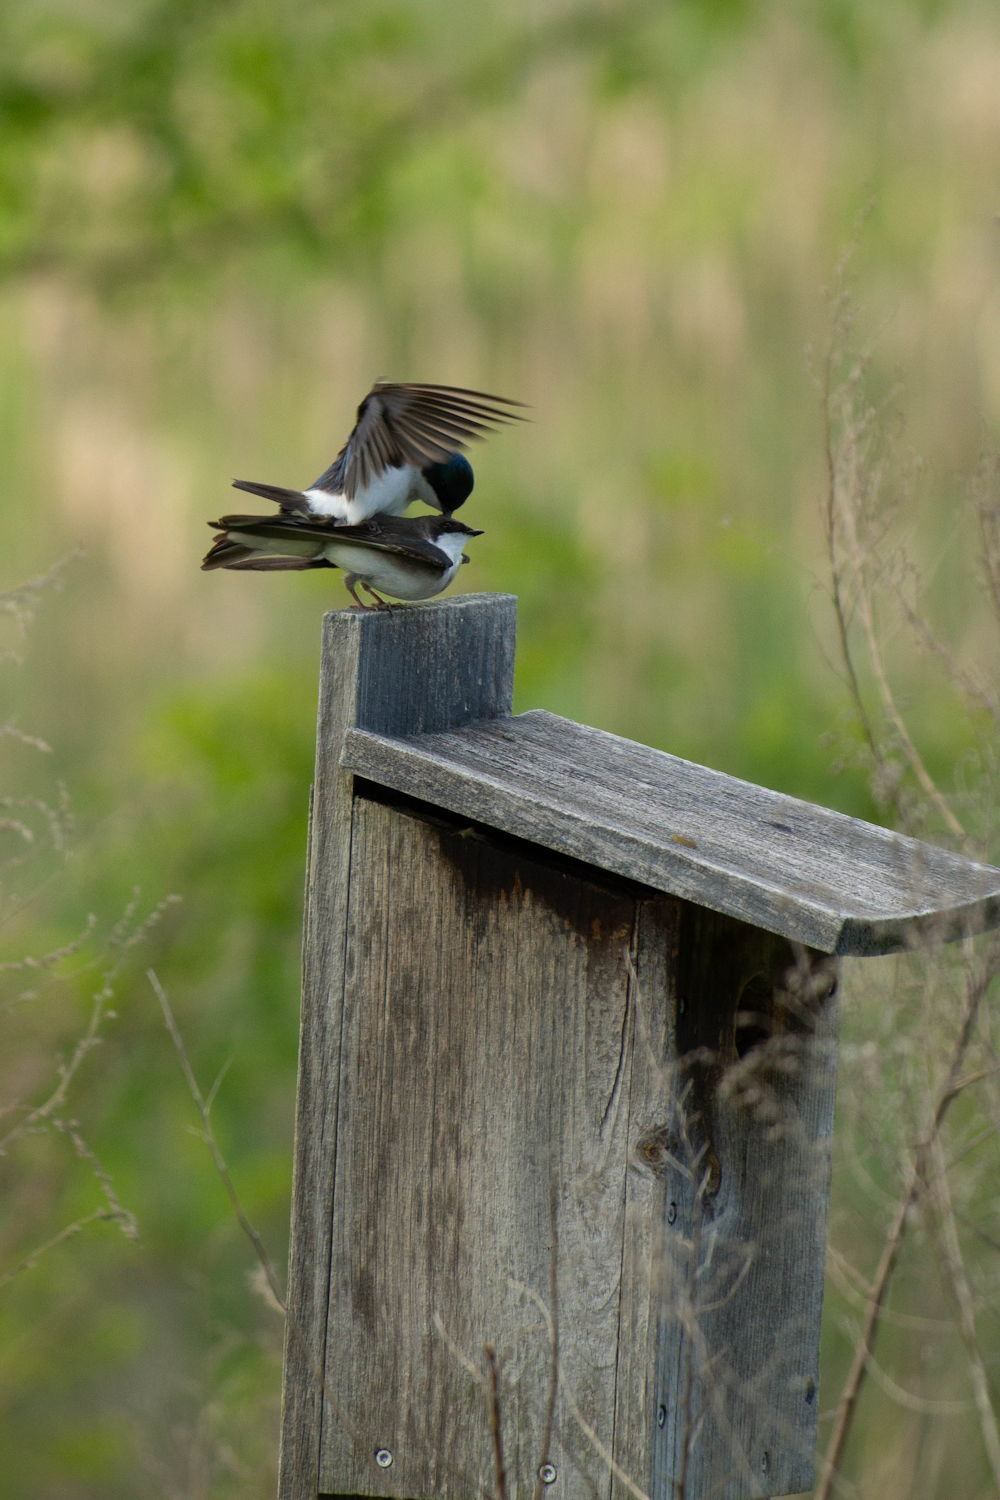 a small bird perched on top of a wooden bird house